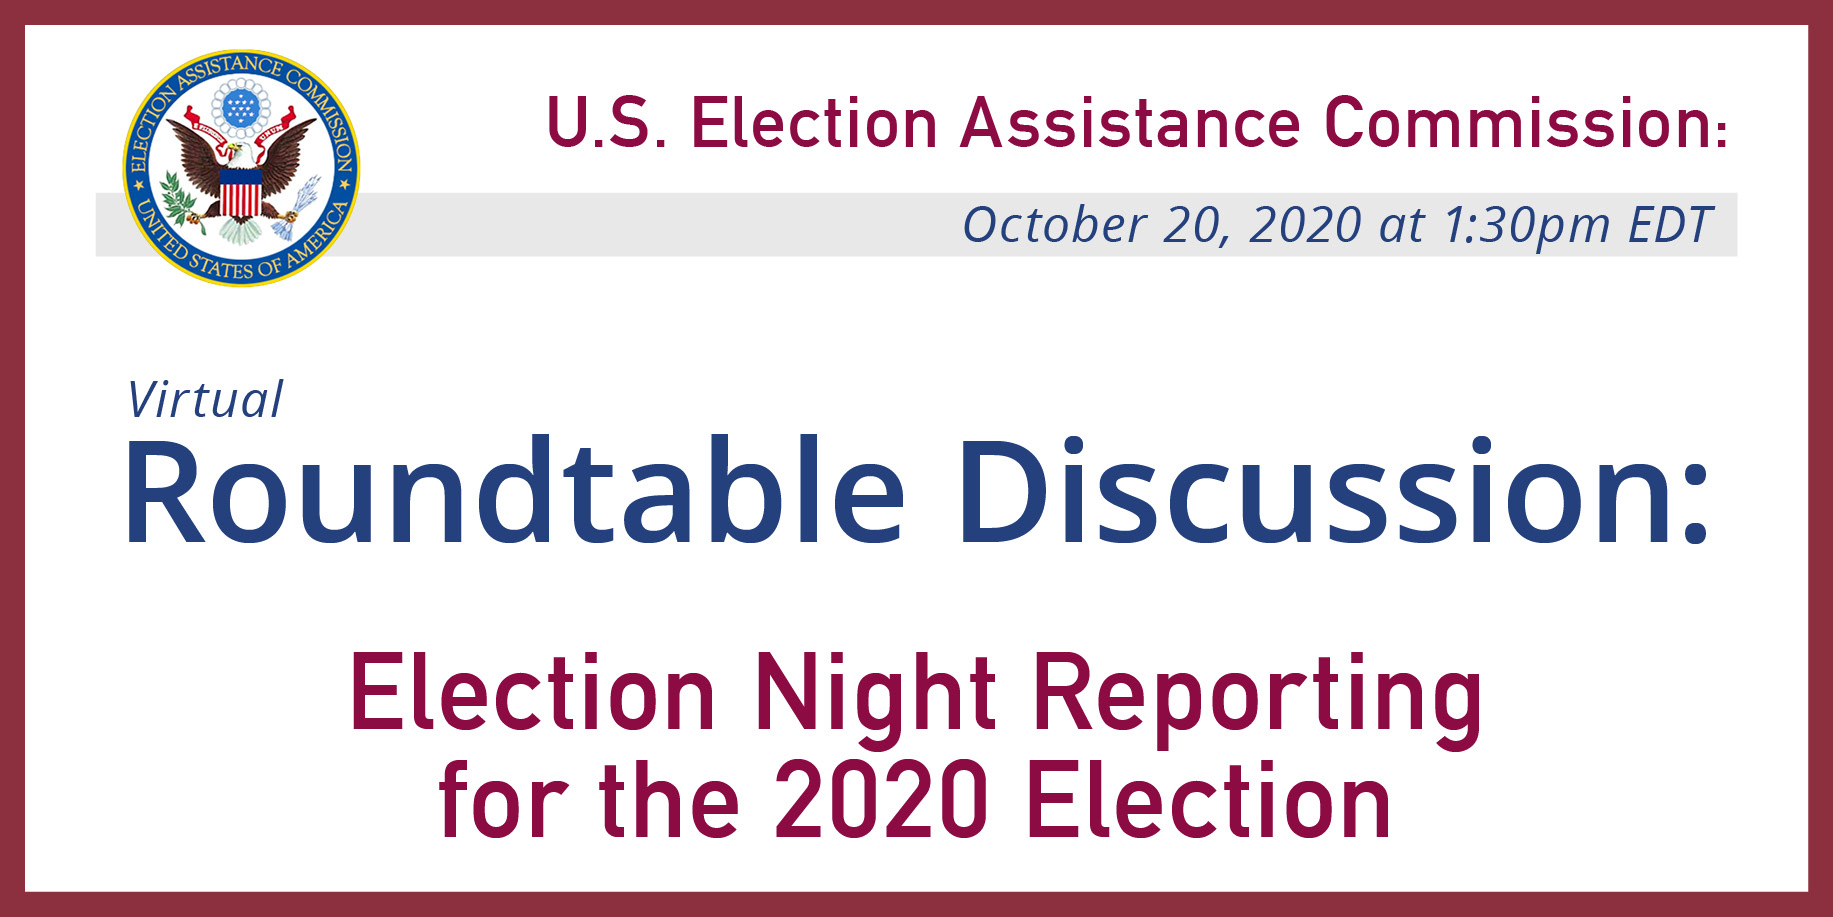 EAC Roundtable Discussion: Roundtable Discussion: Election Night Reporting for the 2020 Election on 10/20/20 at 1:30 PM EDT